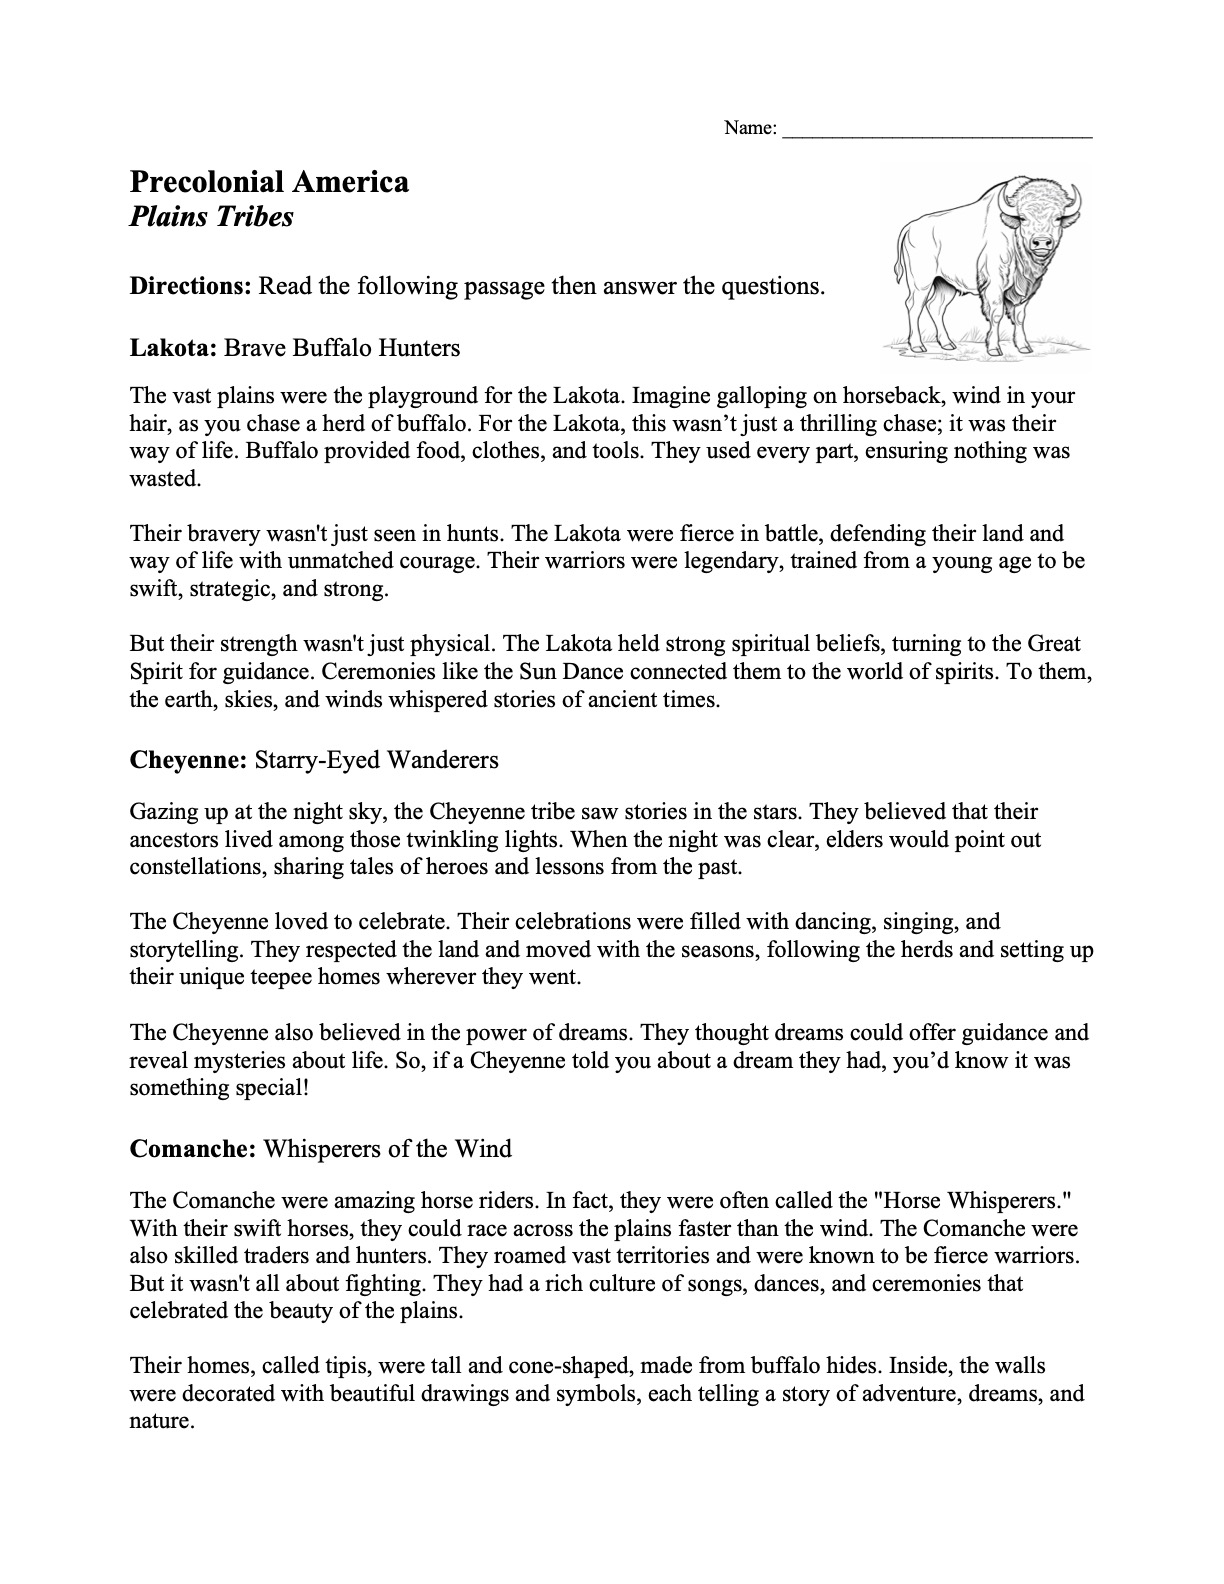 This is a preview image of our Plains Tribes Worksheet. Click on it to enlarge this image and view the source file.